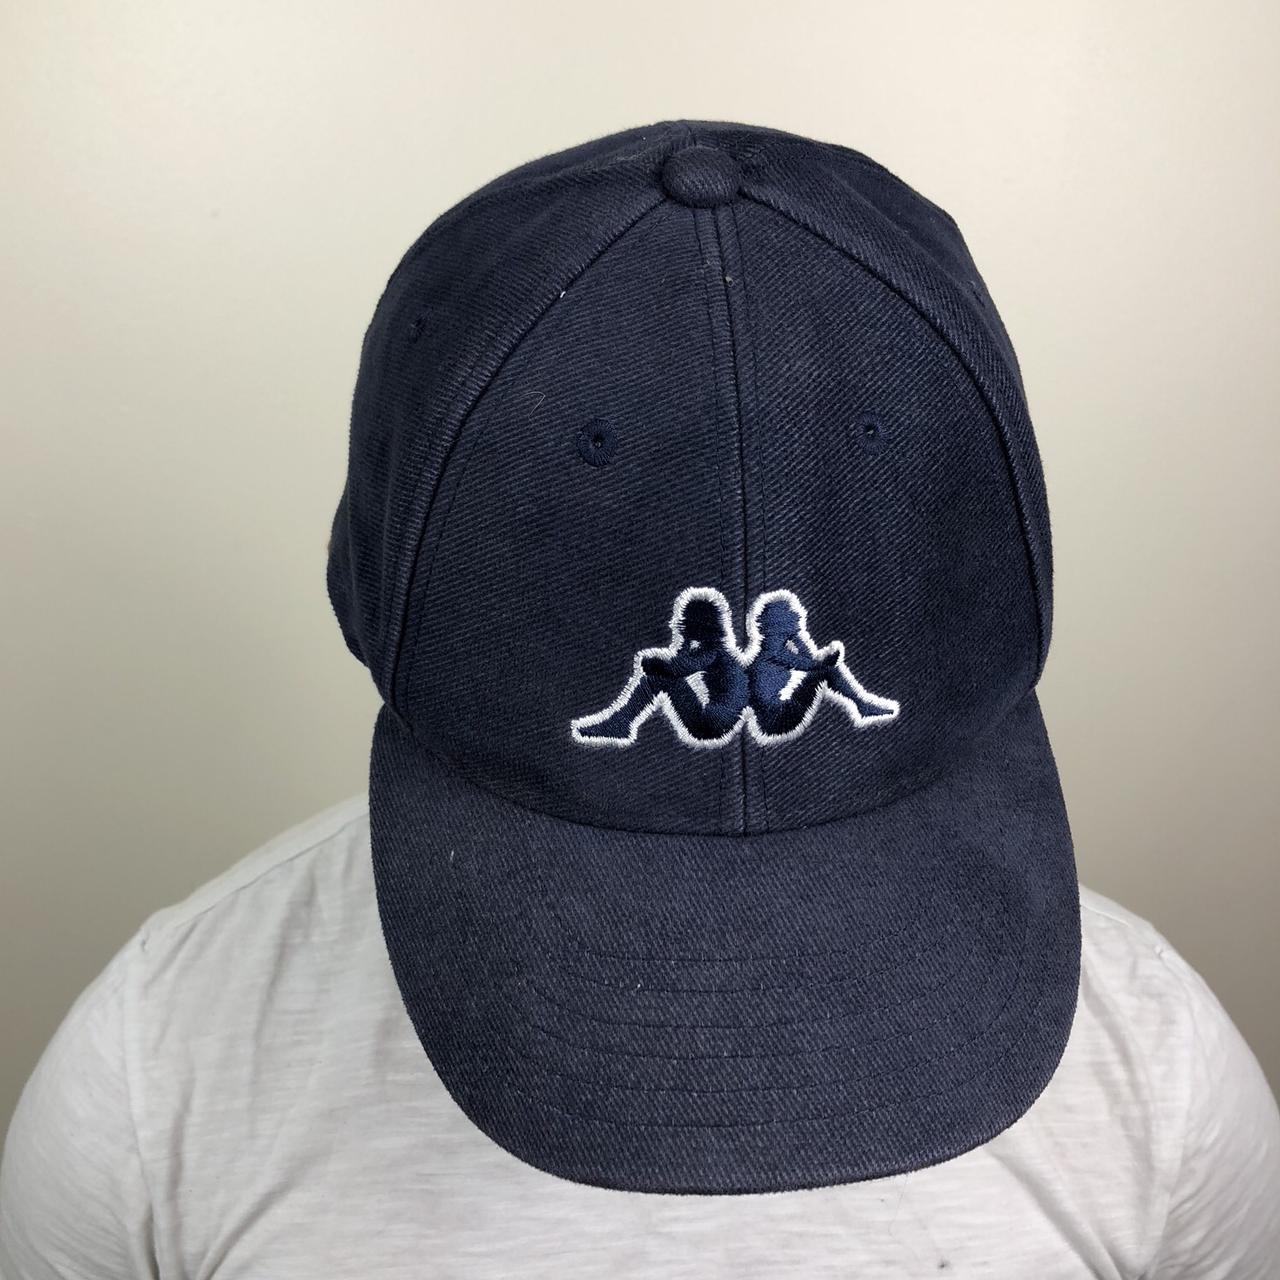 BLUE Depop KAPPA VINTAGE size... our one - CAP. caps All are